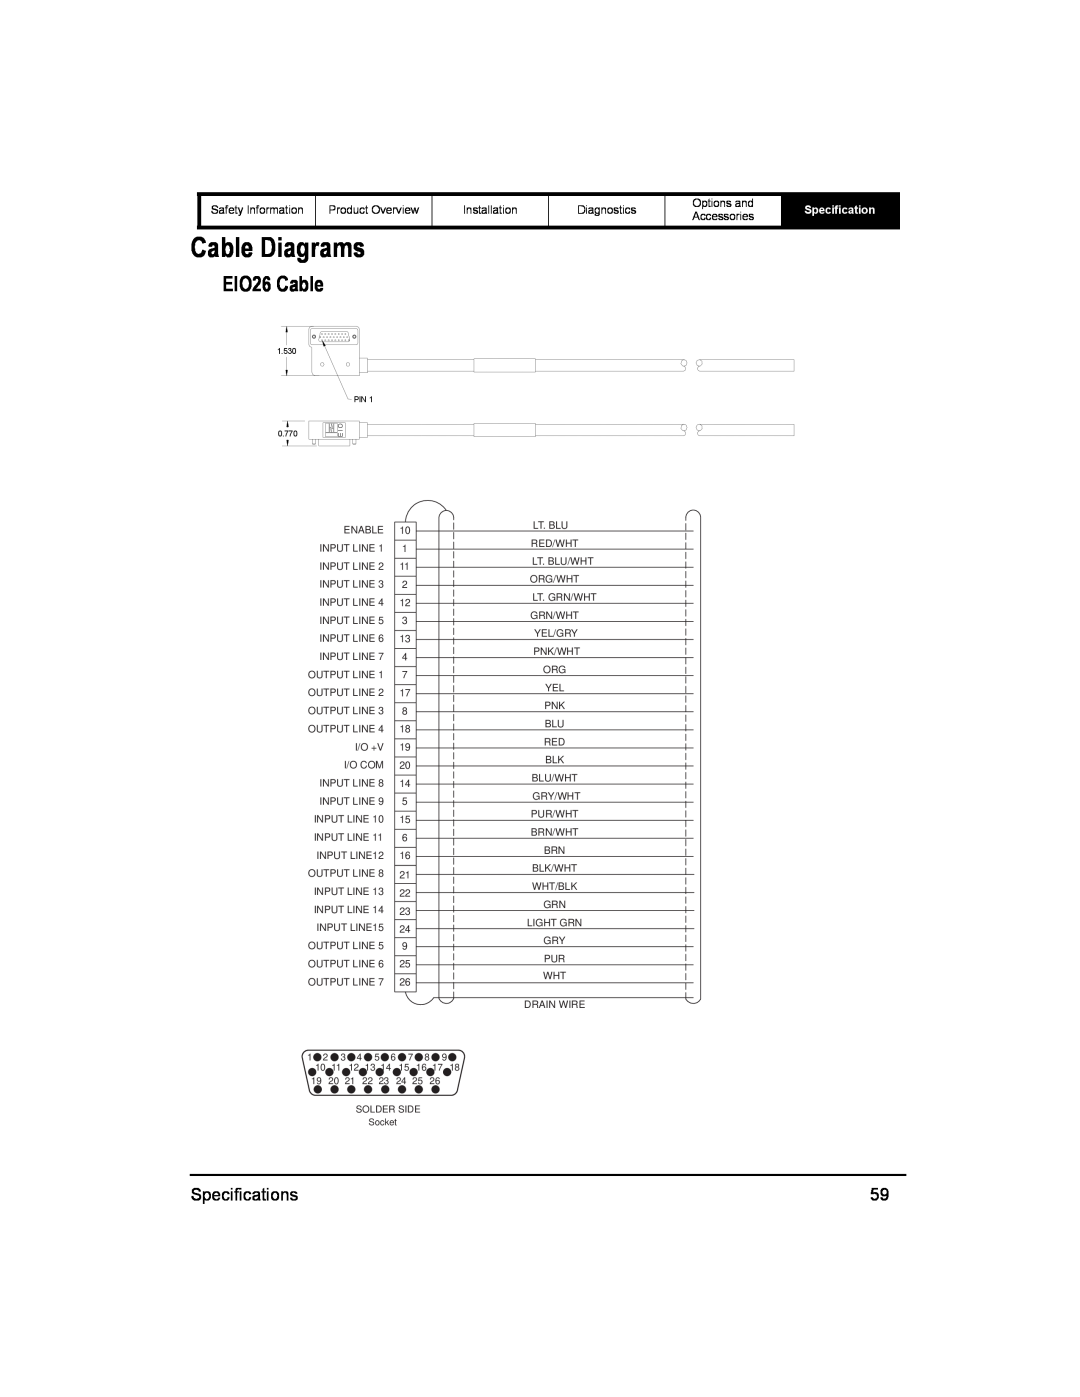 Emerson 400518-01 installation manual Cable Diagrams, EIO26 Cable, Specification 